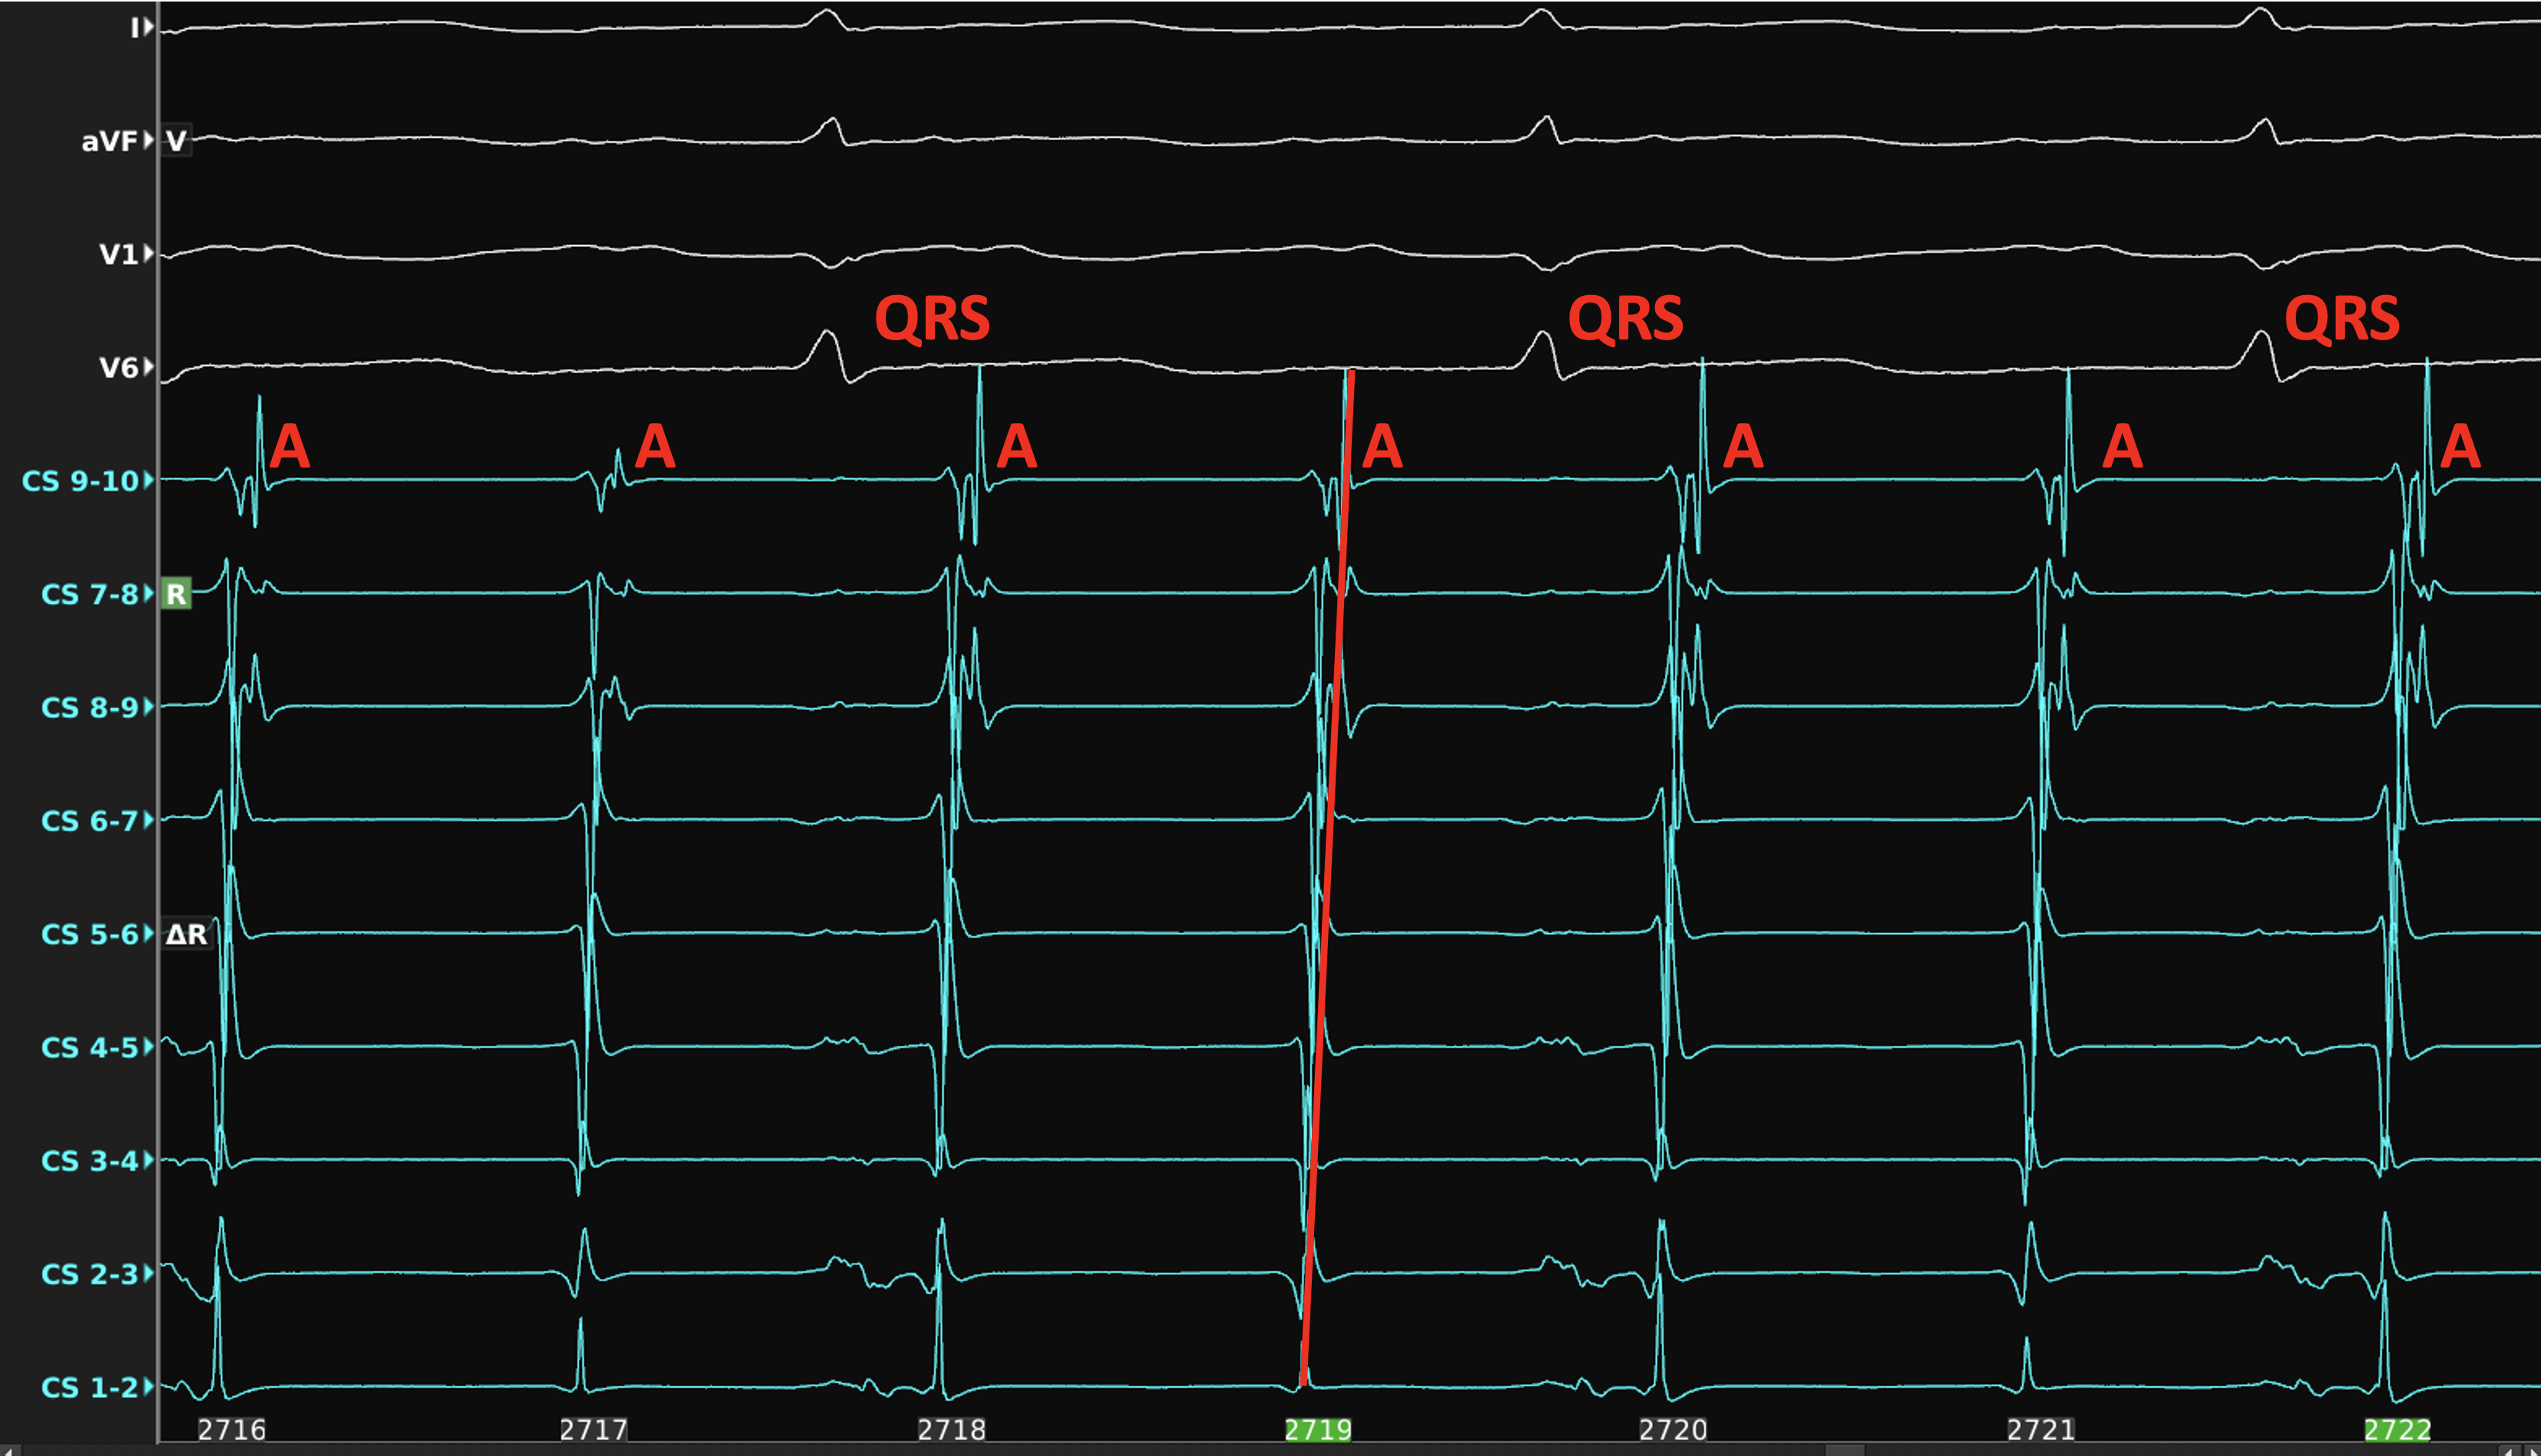 episodic atrial flutter icd 10